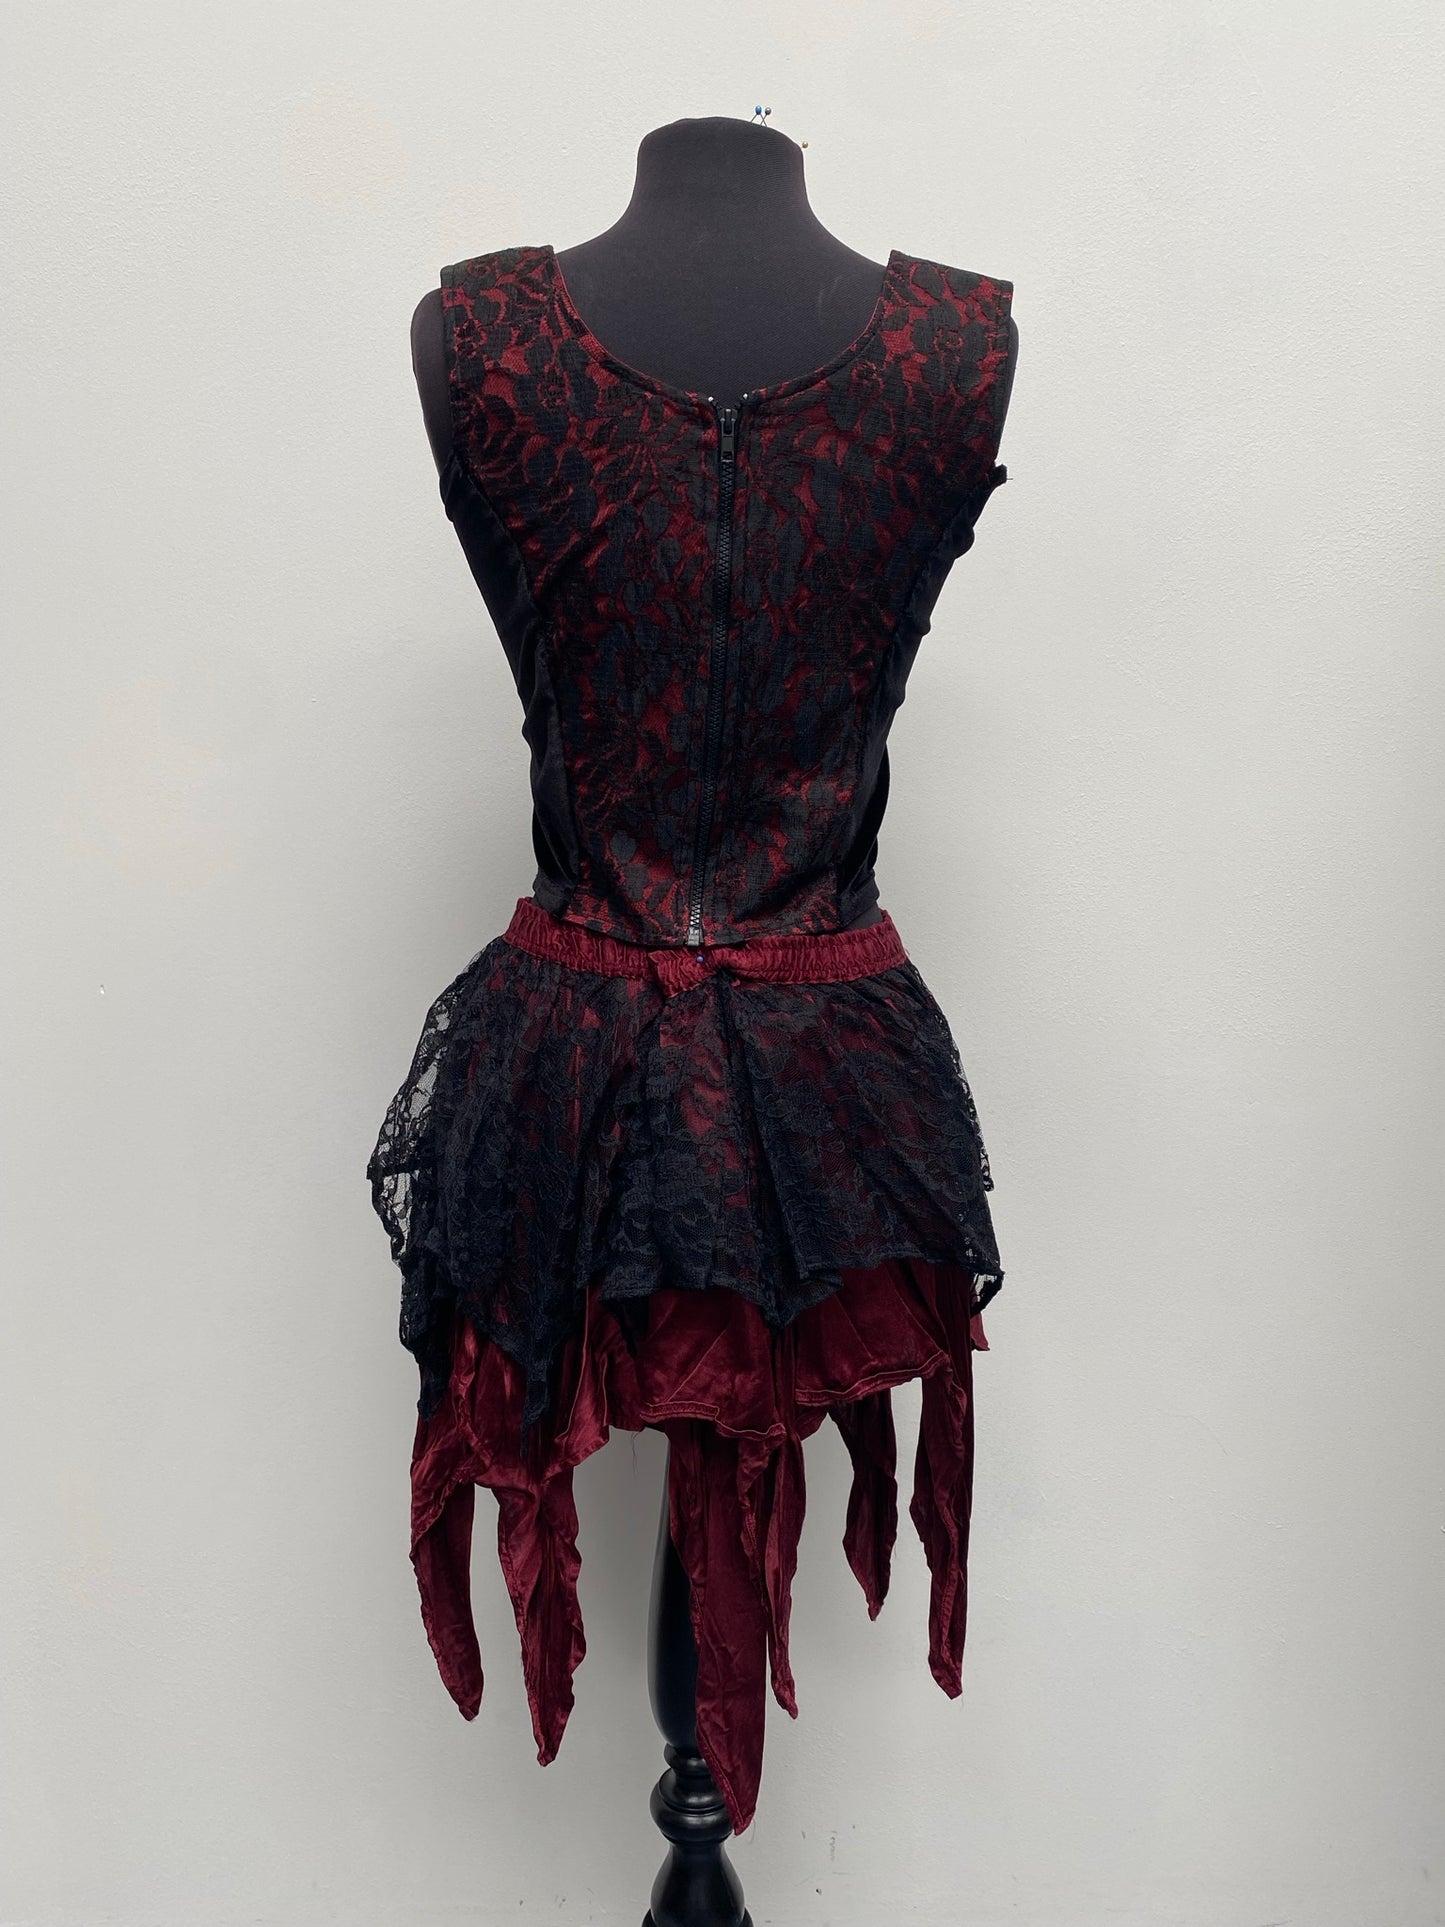 Bares 2 piece Gothic Outfit - Skirt & Top Red Black S/M